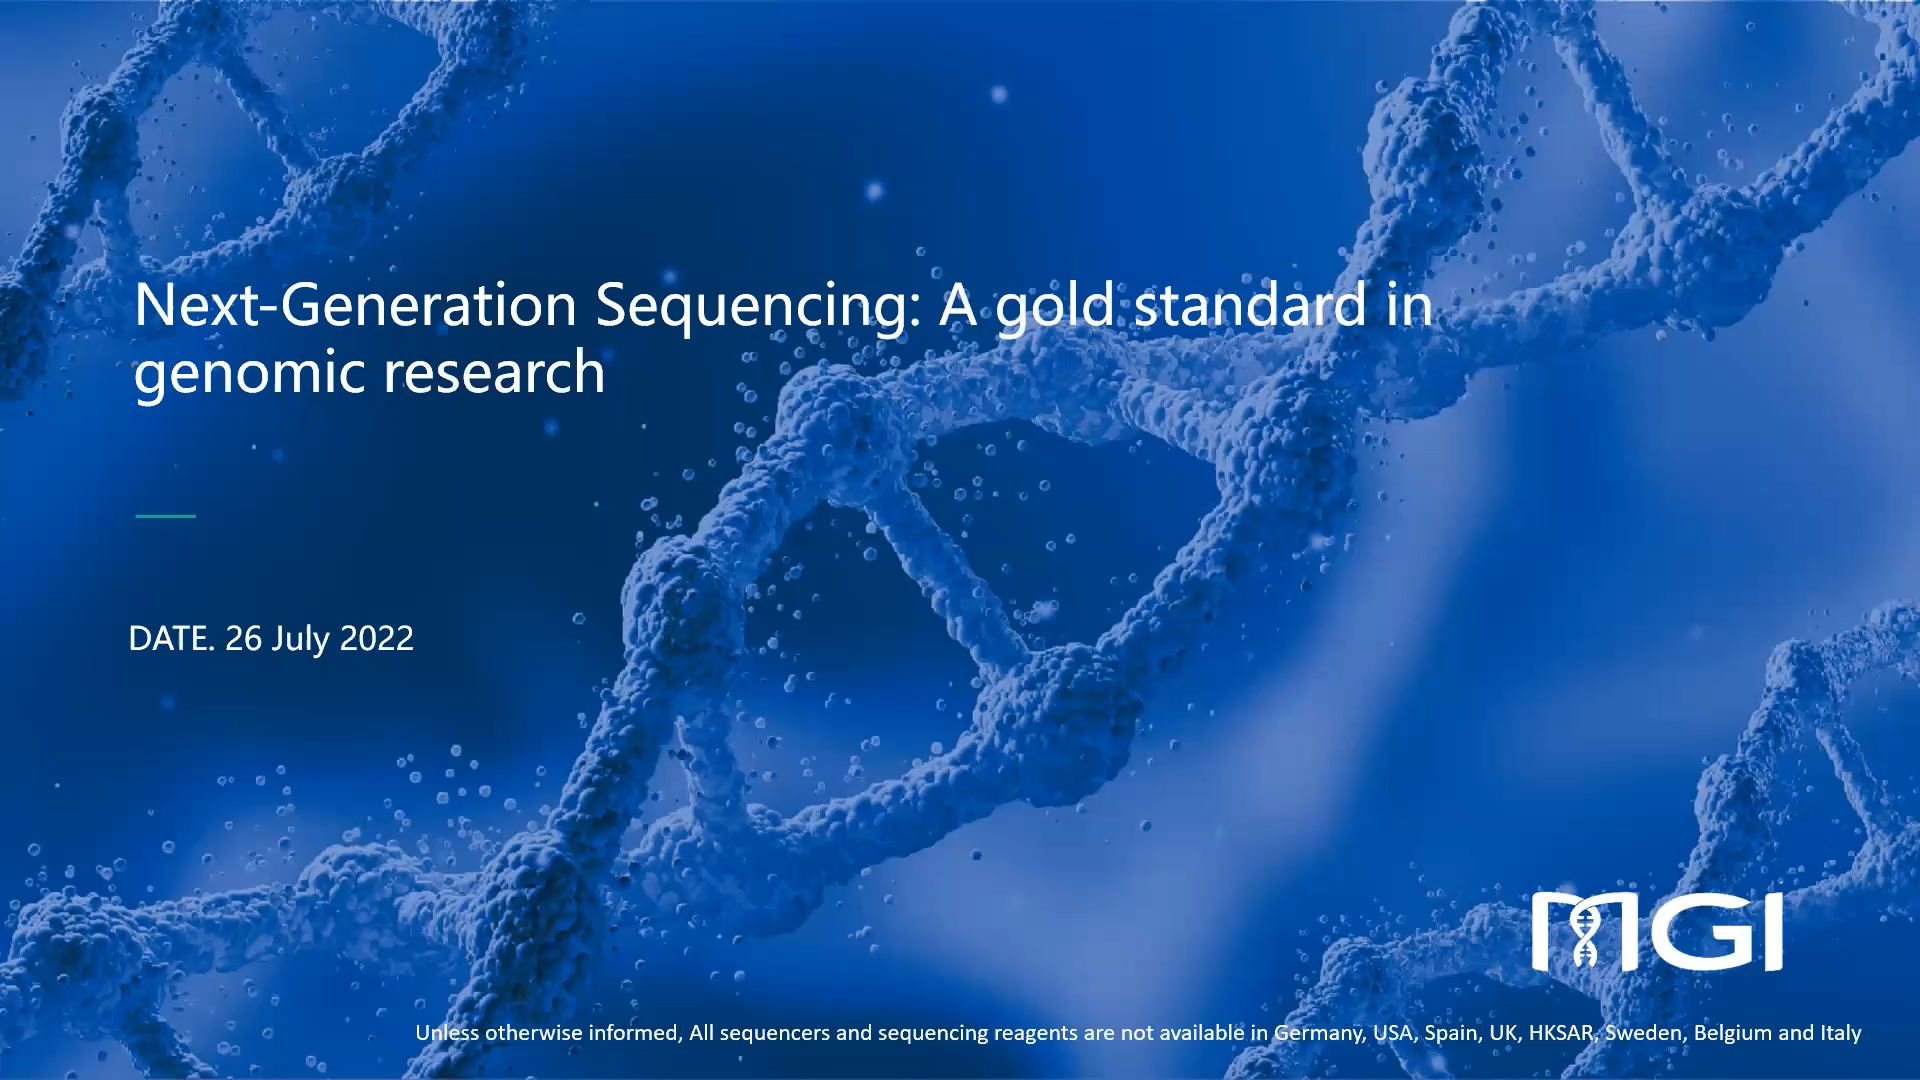 Next-Generation Sequencing: A gold standard in genomic research